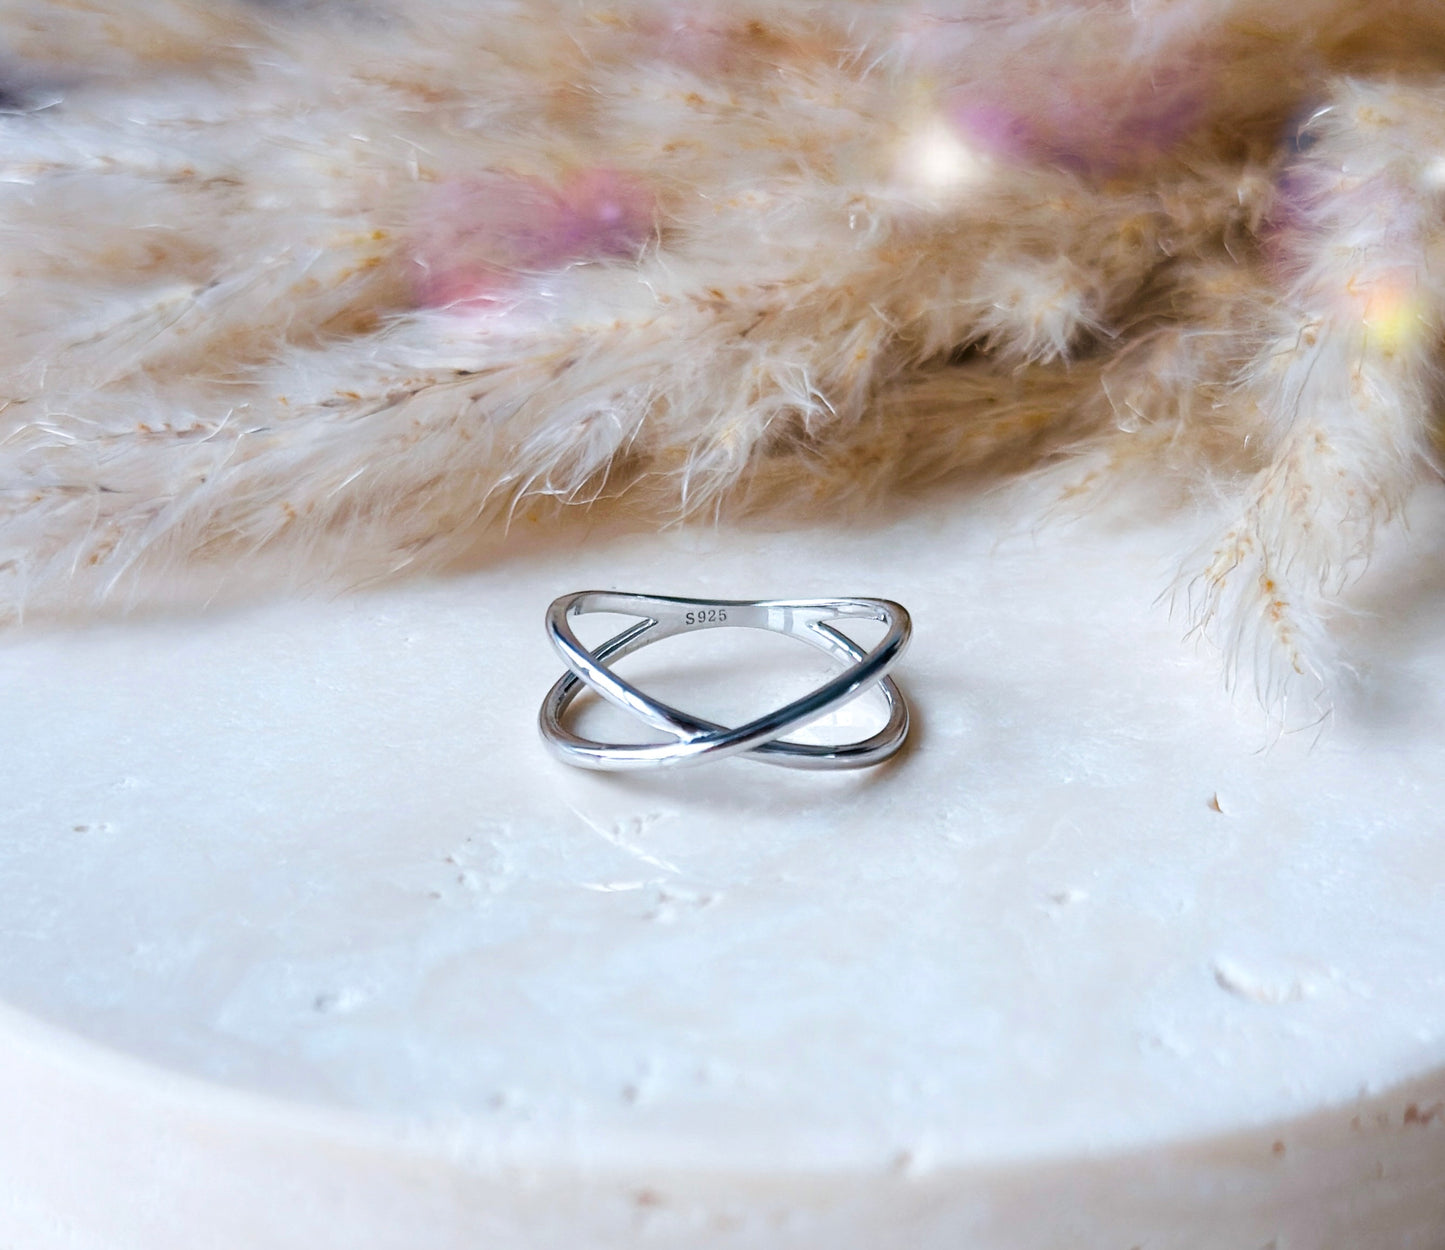 The Silver Criss Cross Ring